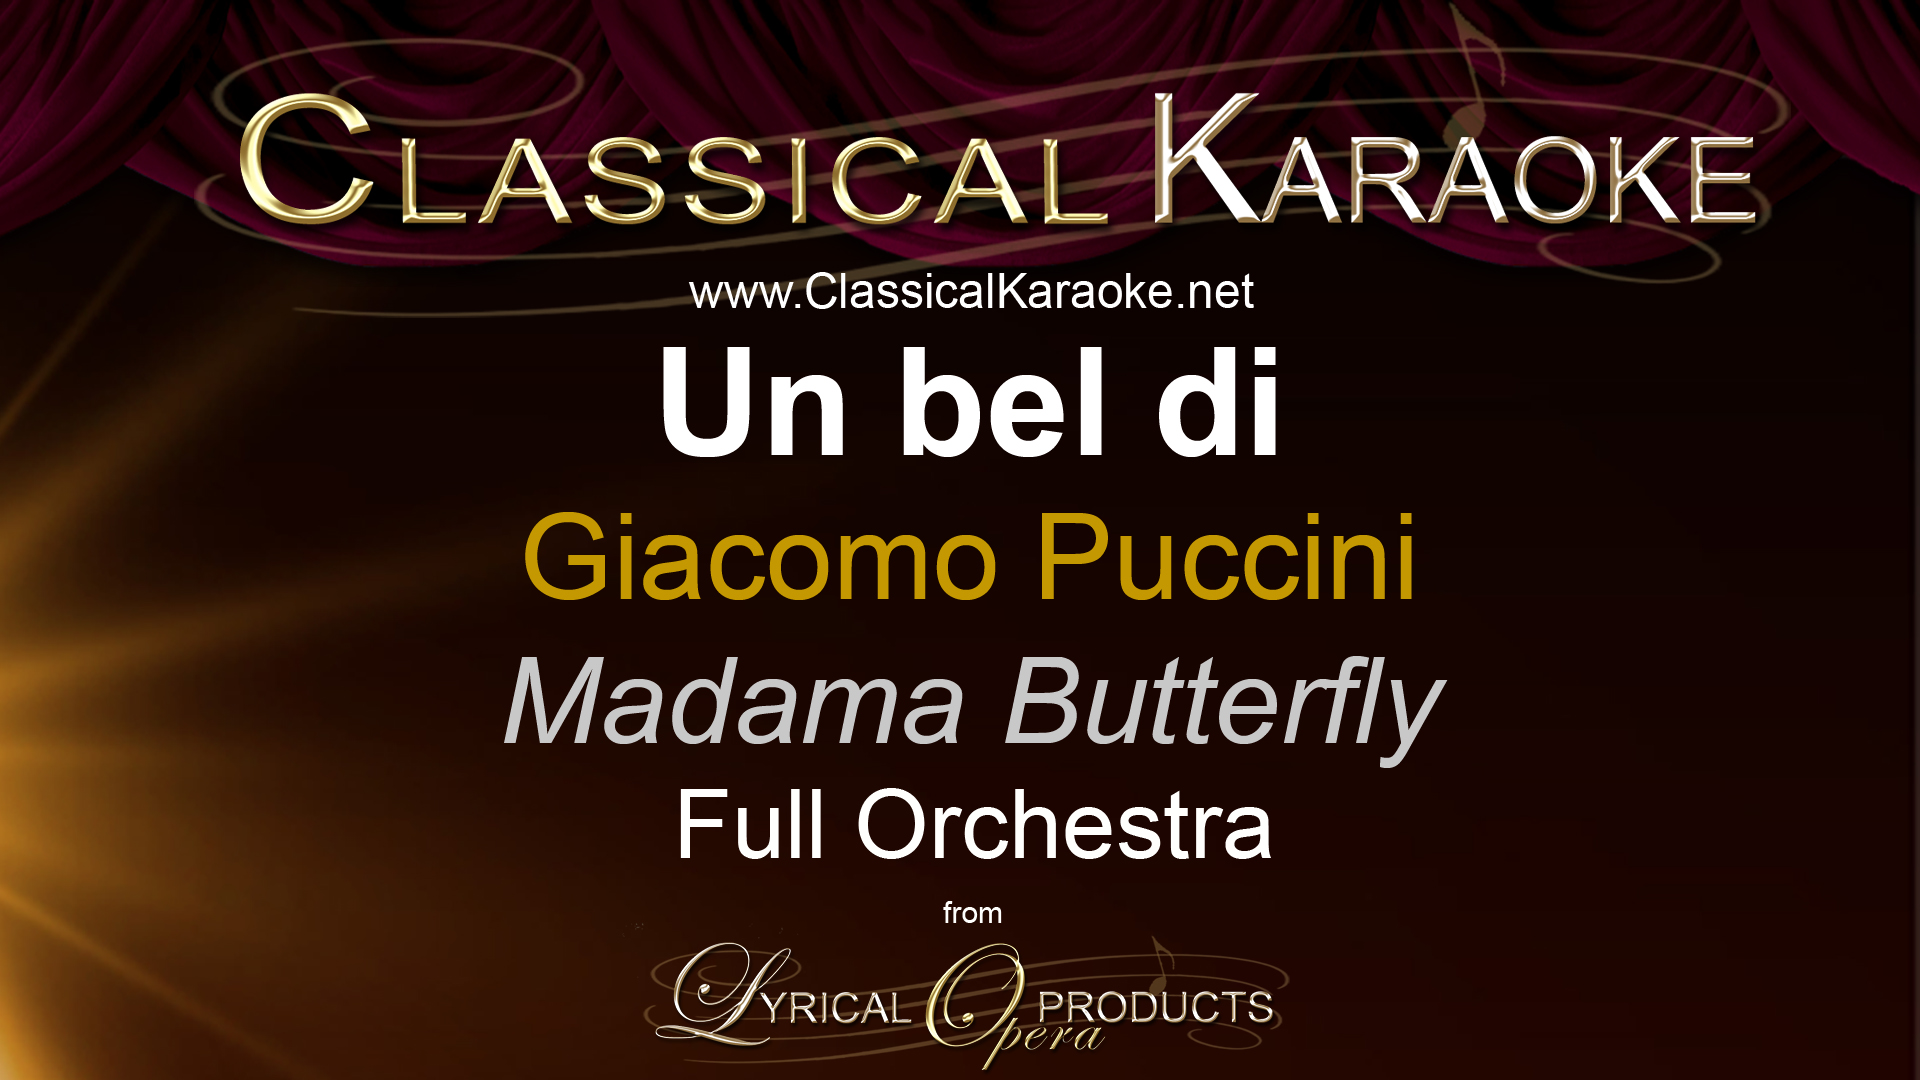 Un bel di, from Madama Butterfly, Full Orchestral Accompaniment (karaoke) track